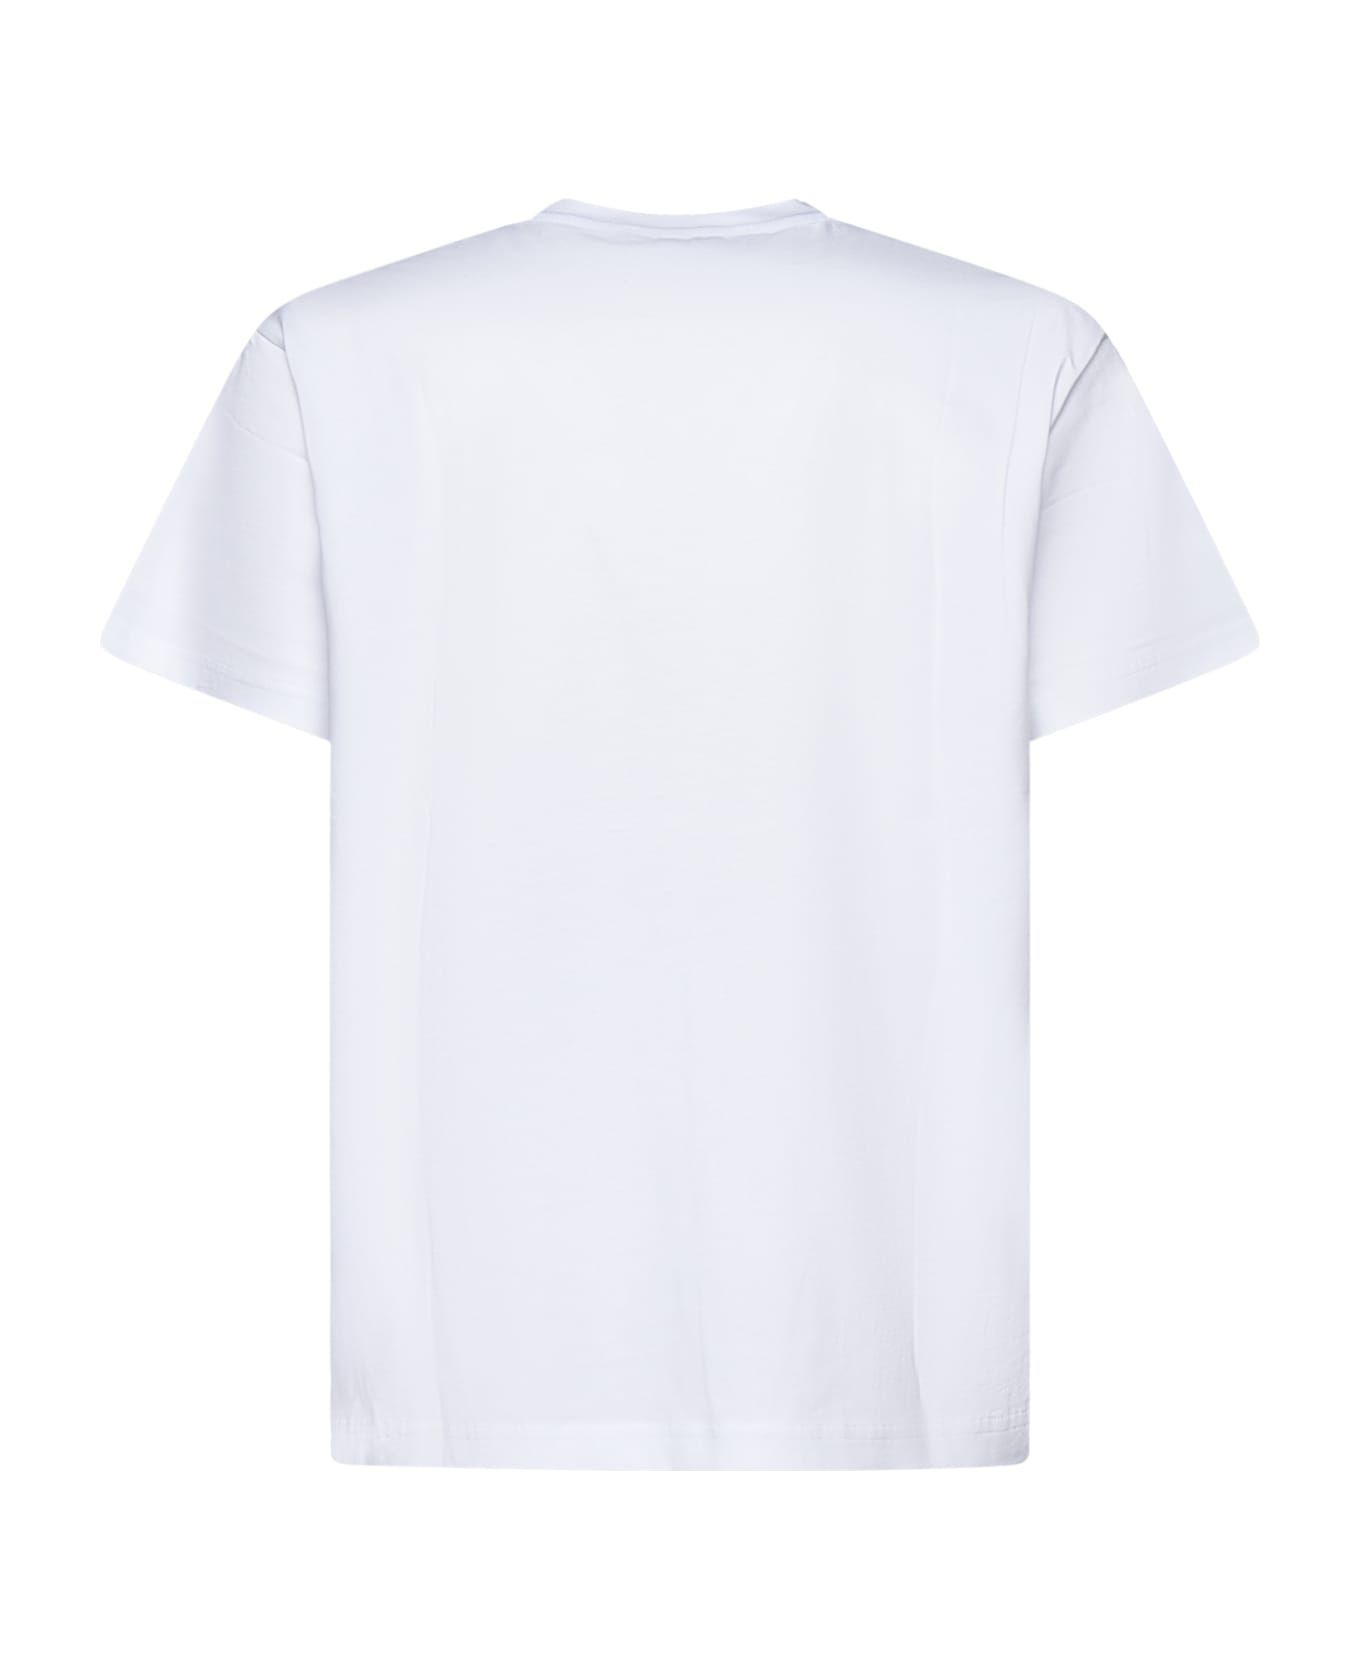 Versace Jeans Couture Logoed T-shirt - White